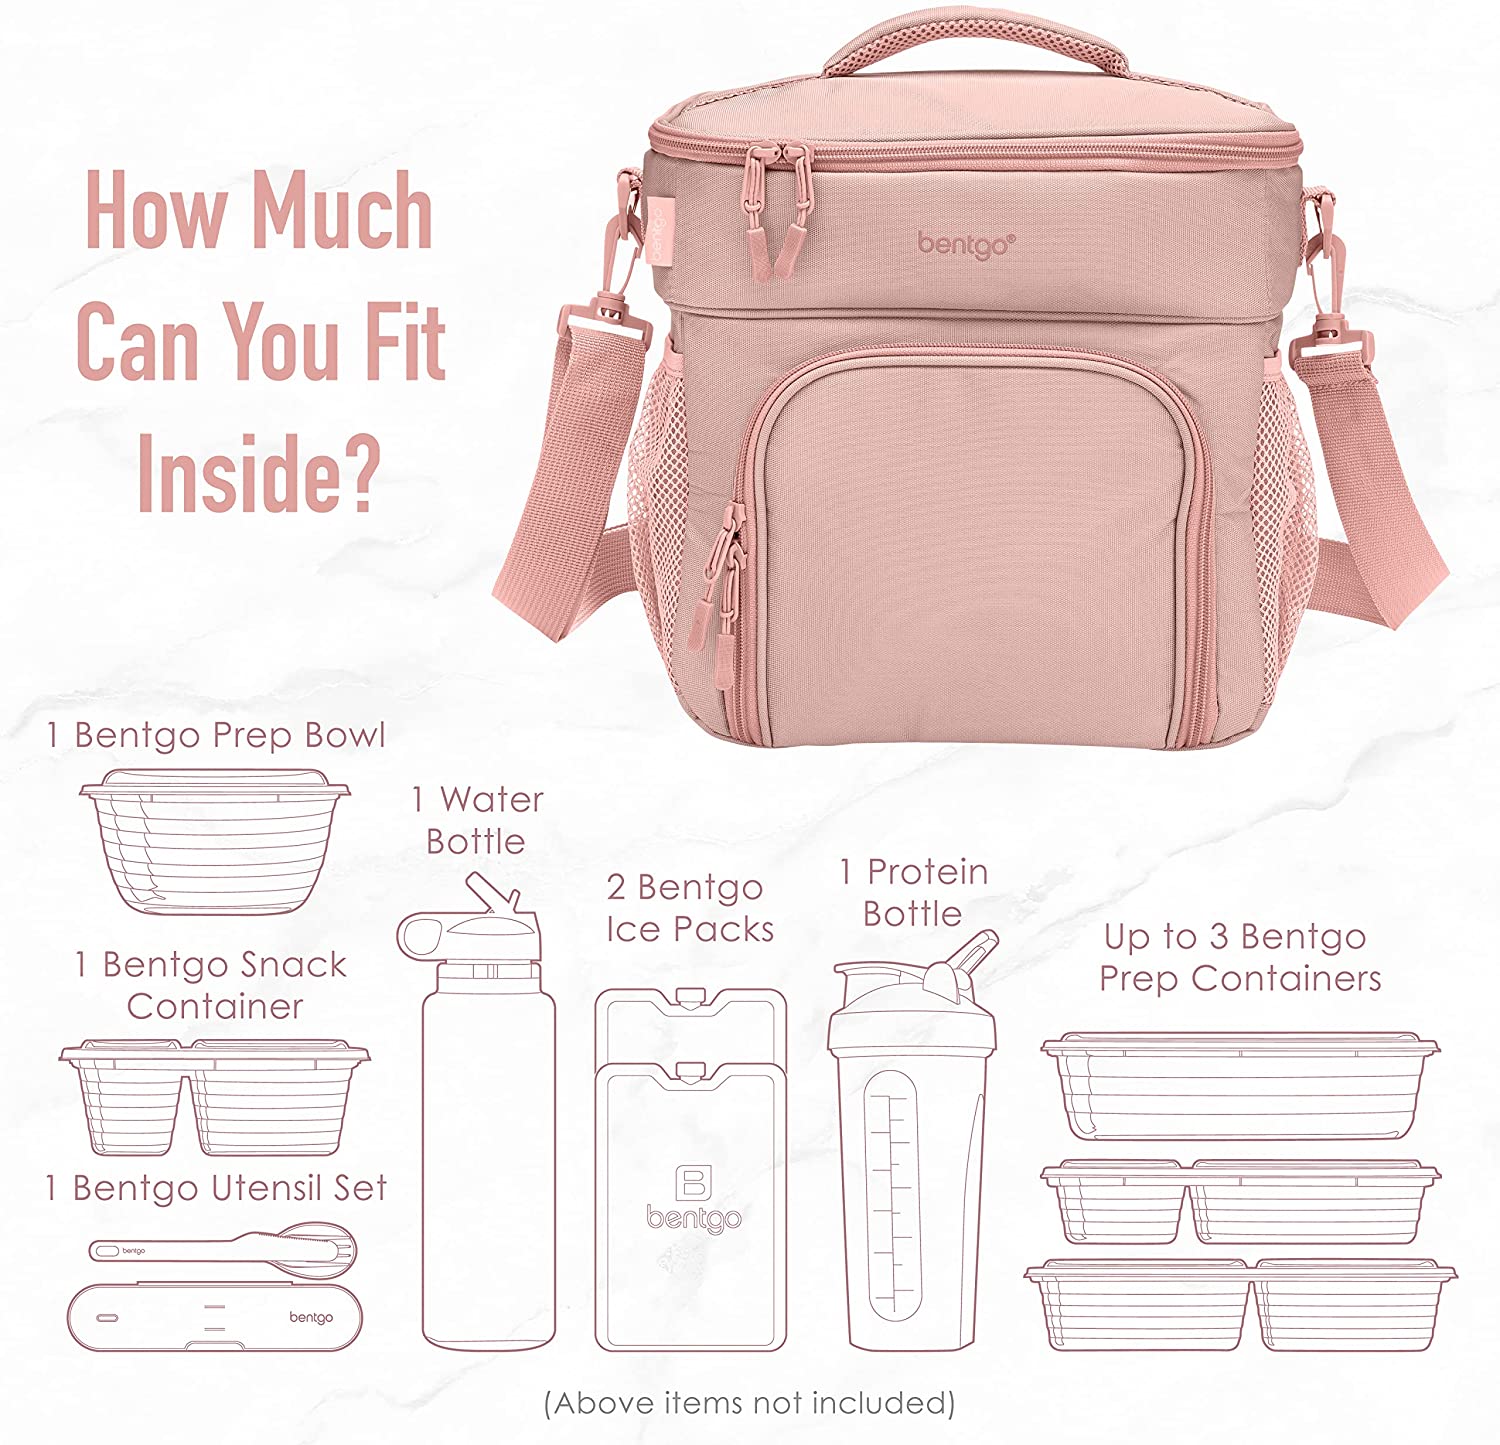 https://bigbigmart.com/wp-content/uploads/2022/07/Bentgo%C2%AE-Prep-Deluxe-Multimeal-Bag-Premium-Insulation-up-to-8-Hrs-with-Water-Resistant-Exterior-Interior-Extra-Large-Lunch-Bag-Holds-4-Meals-Snacks-Great-for-All-Day-Meal-Prep-Blush5.jpg